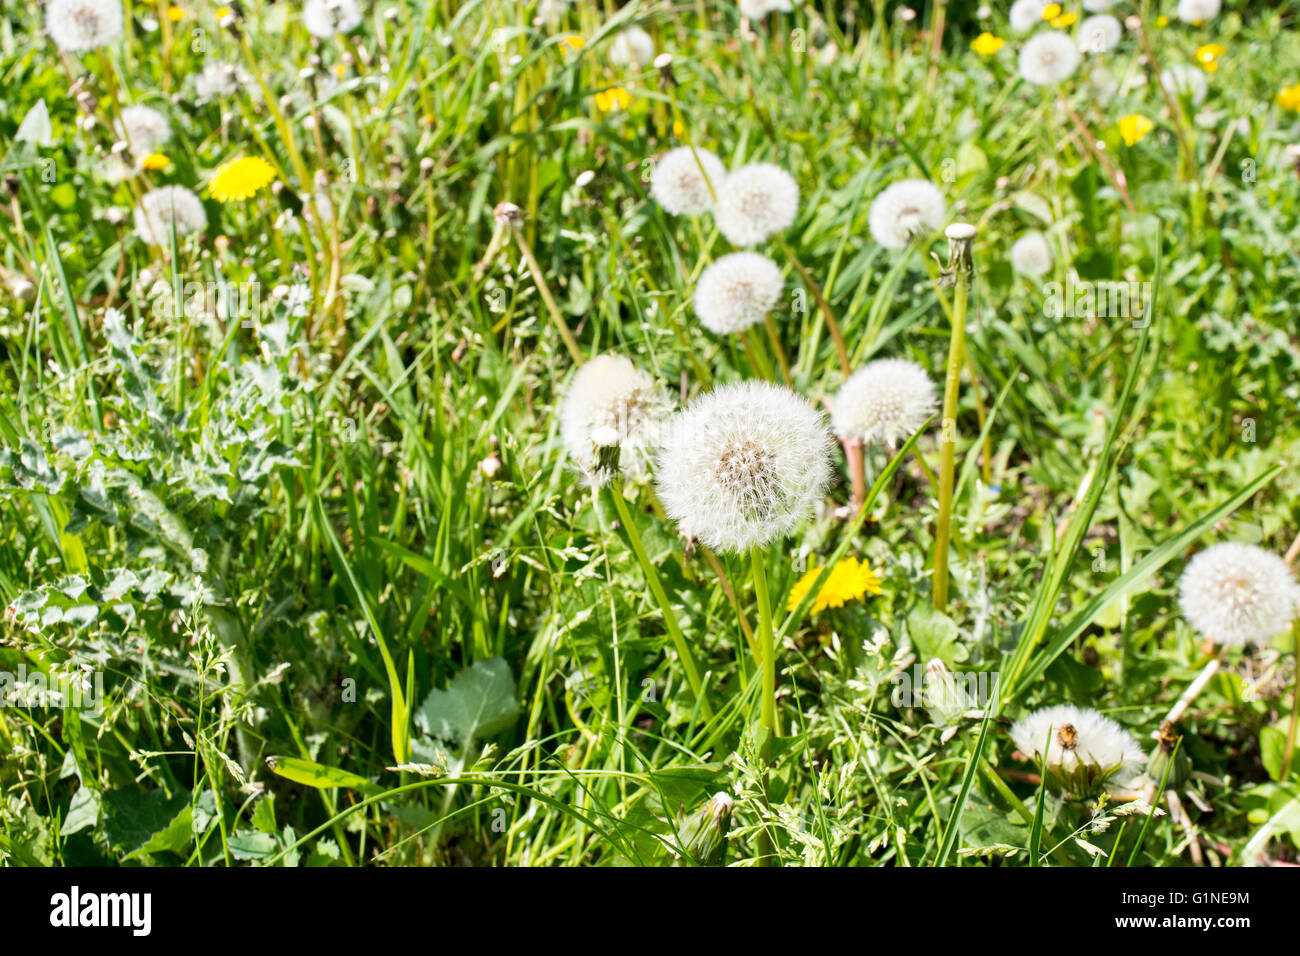 Common Dandelions (Taraxacum officinale) that have gone to seed with the globe shaped dandelion 'clock' visible Stock Photo